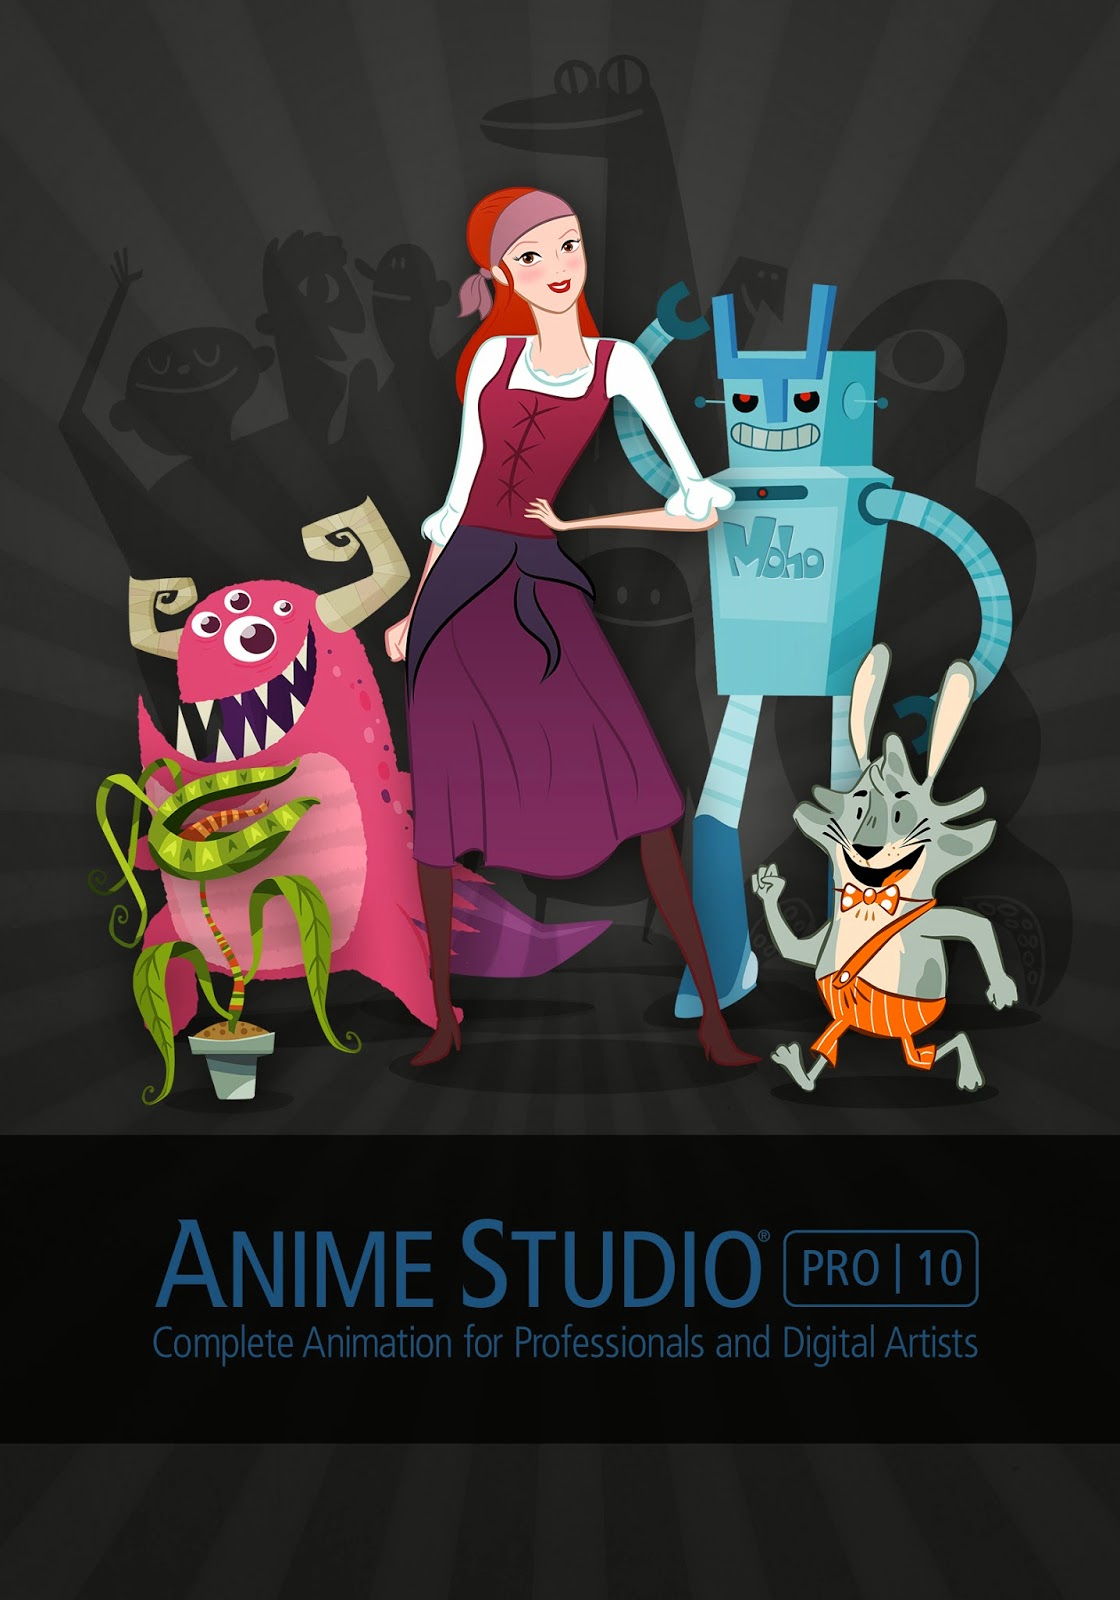 Animation Studio Pro 10 0 Full  Version  Free  Download  With 